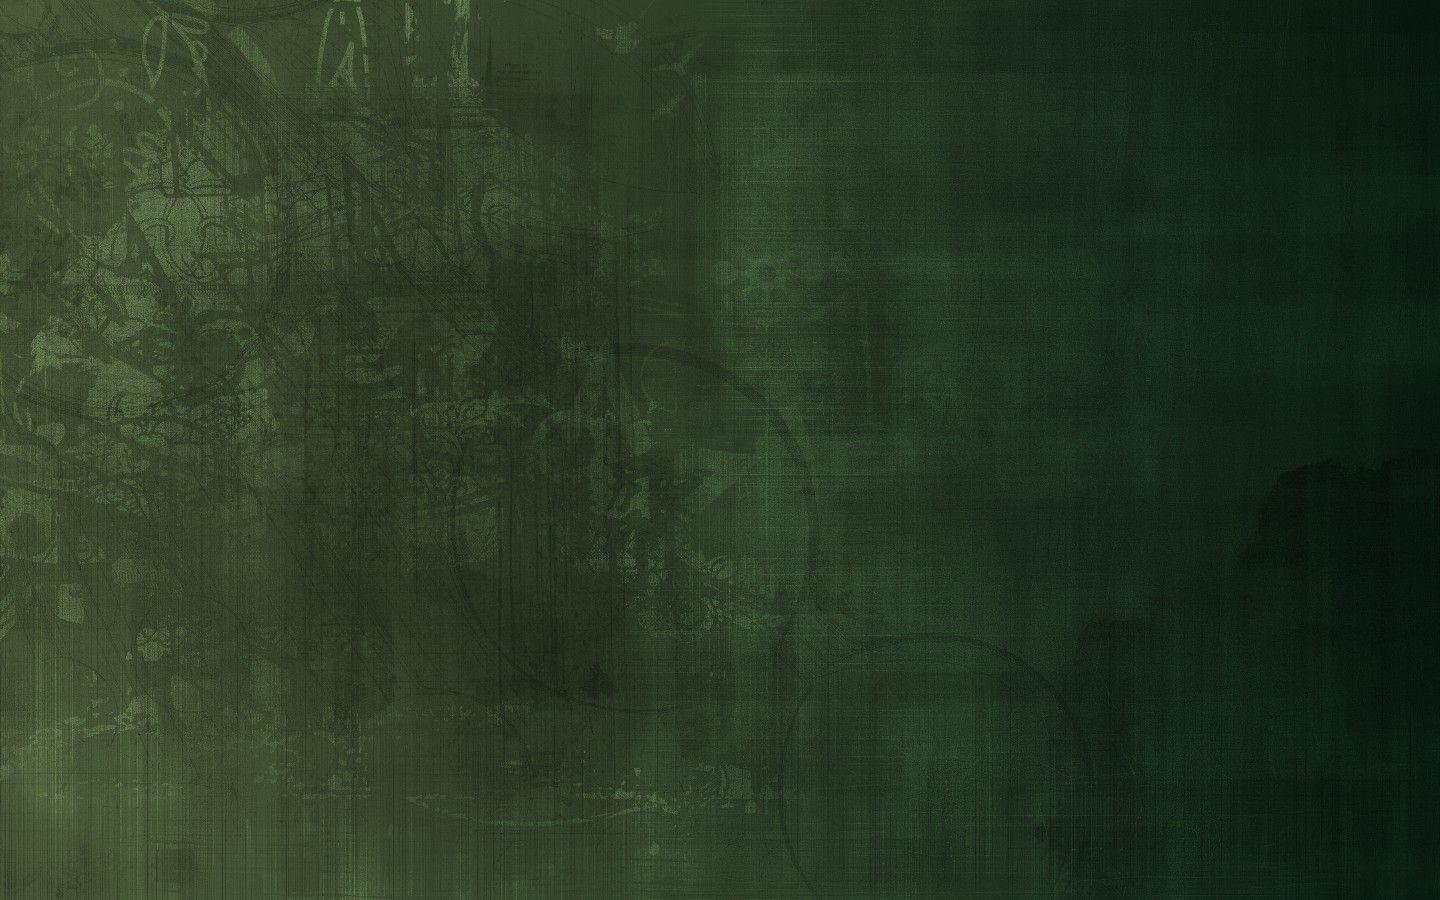 green, abstract, white, tribal, grunge, textures, simplistic